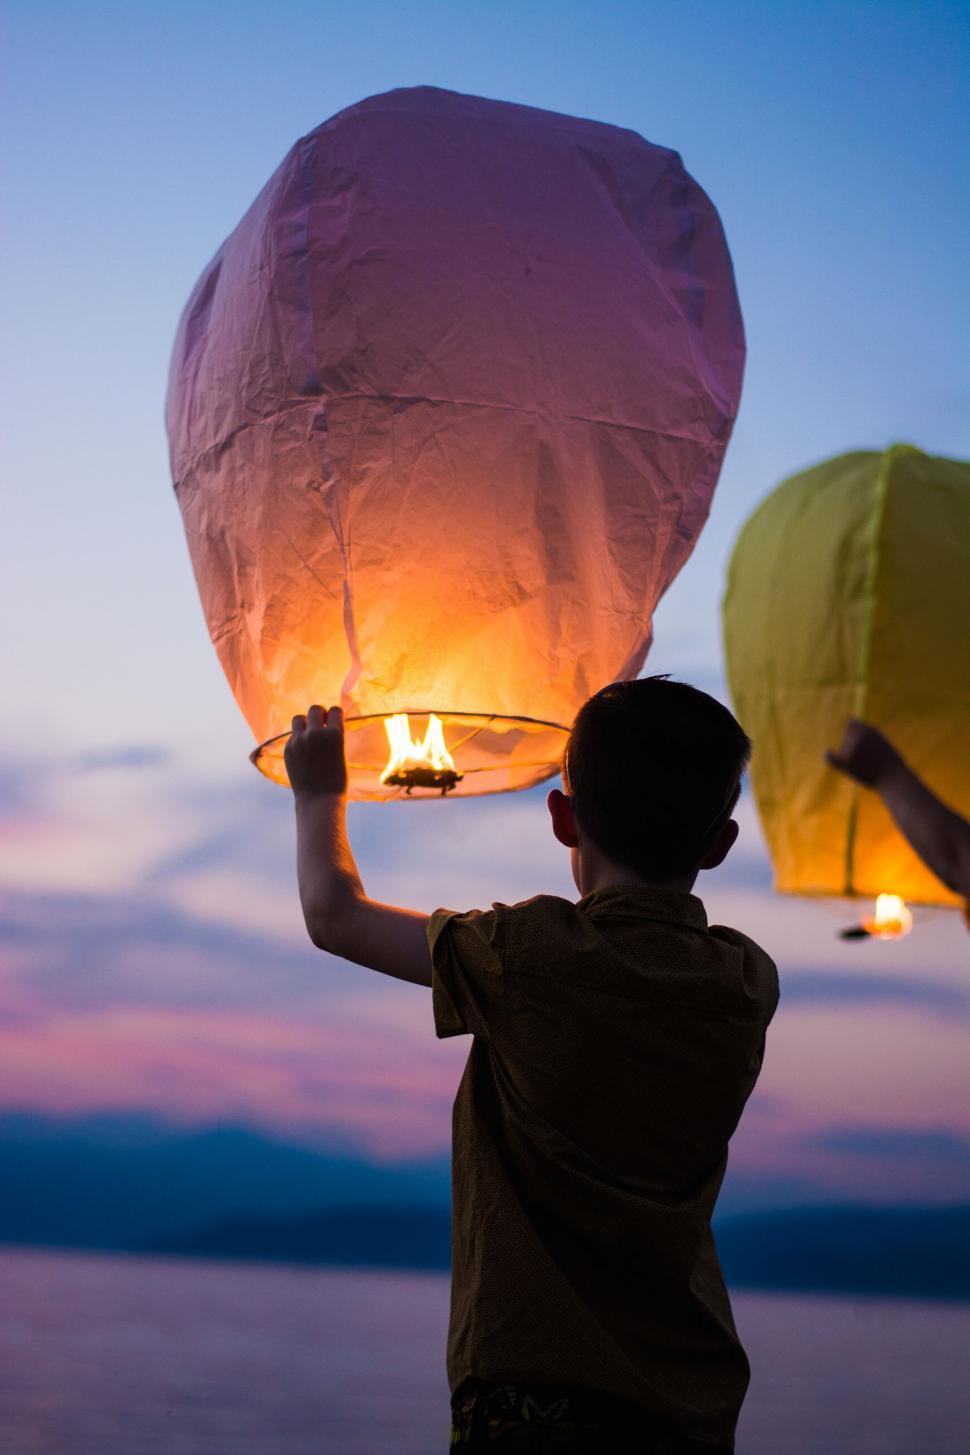 Free Image of Boy Holding Lantern in the Air 